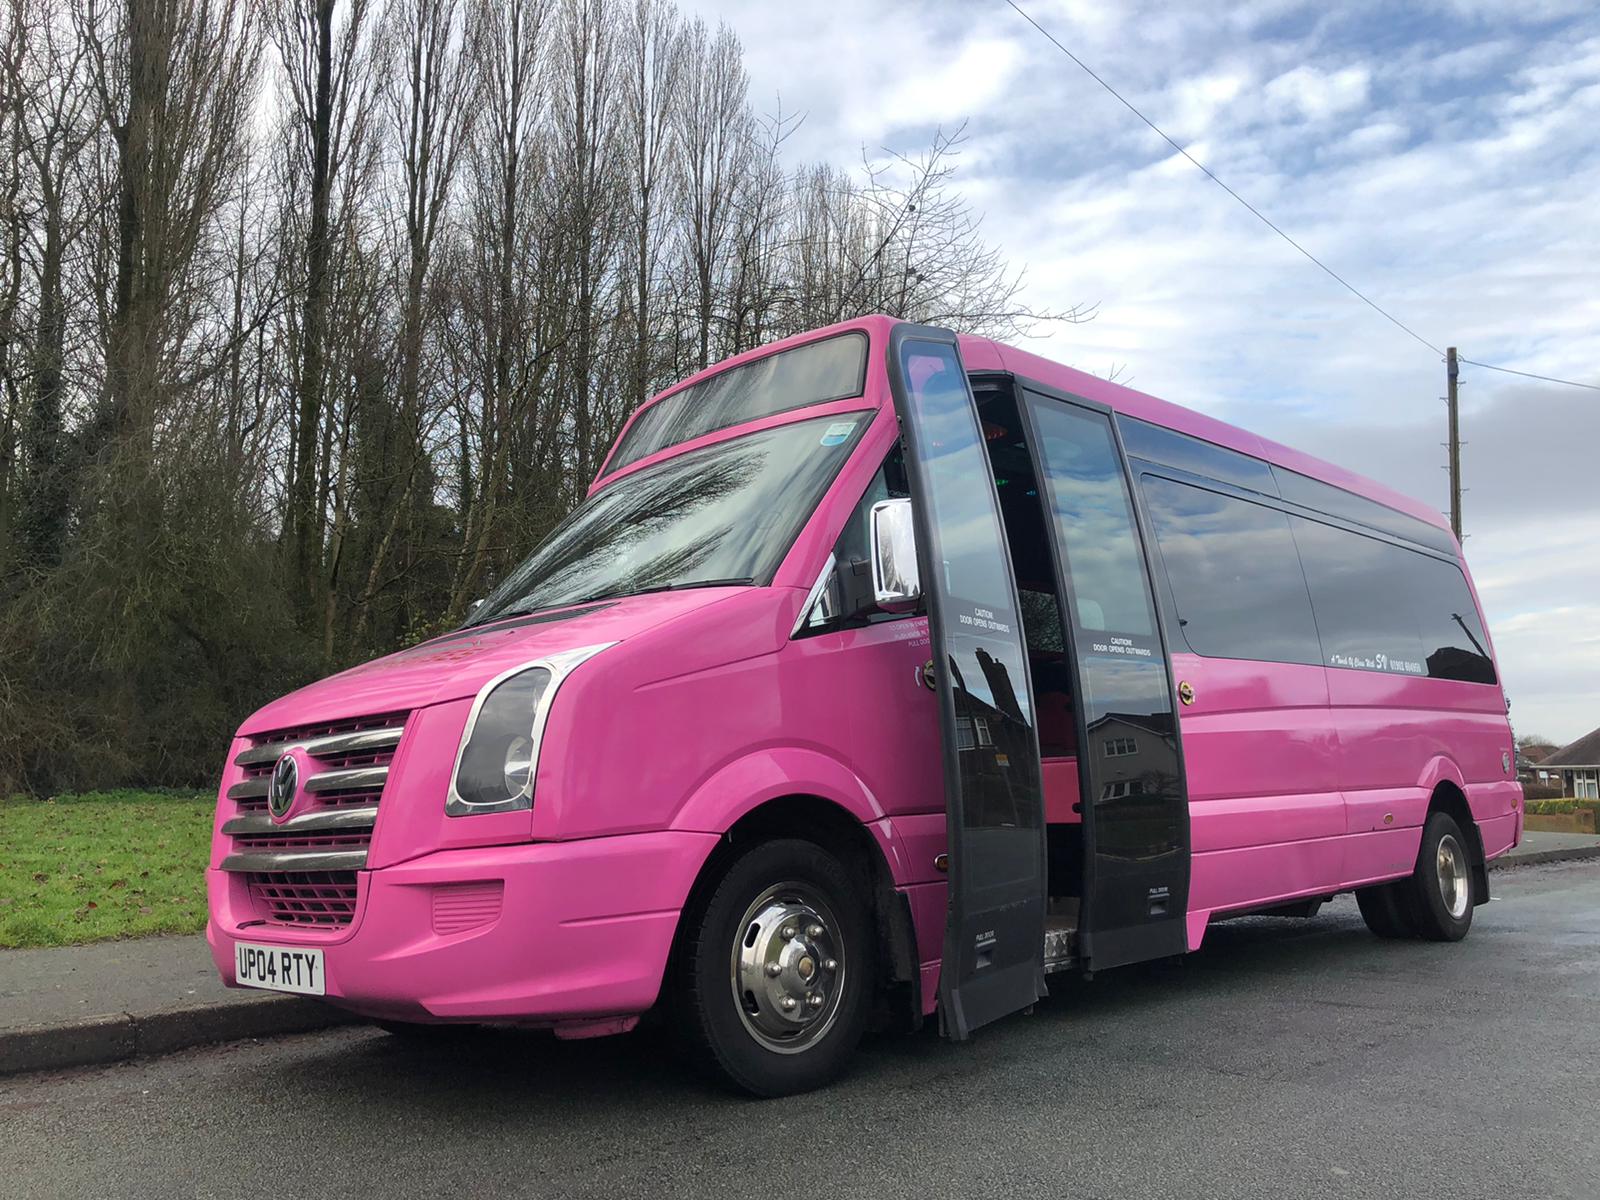 Party Bus Hire Services in Cardiff from LimoHireCardiff.co.uk